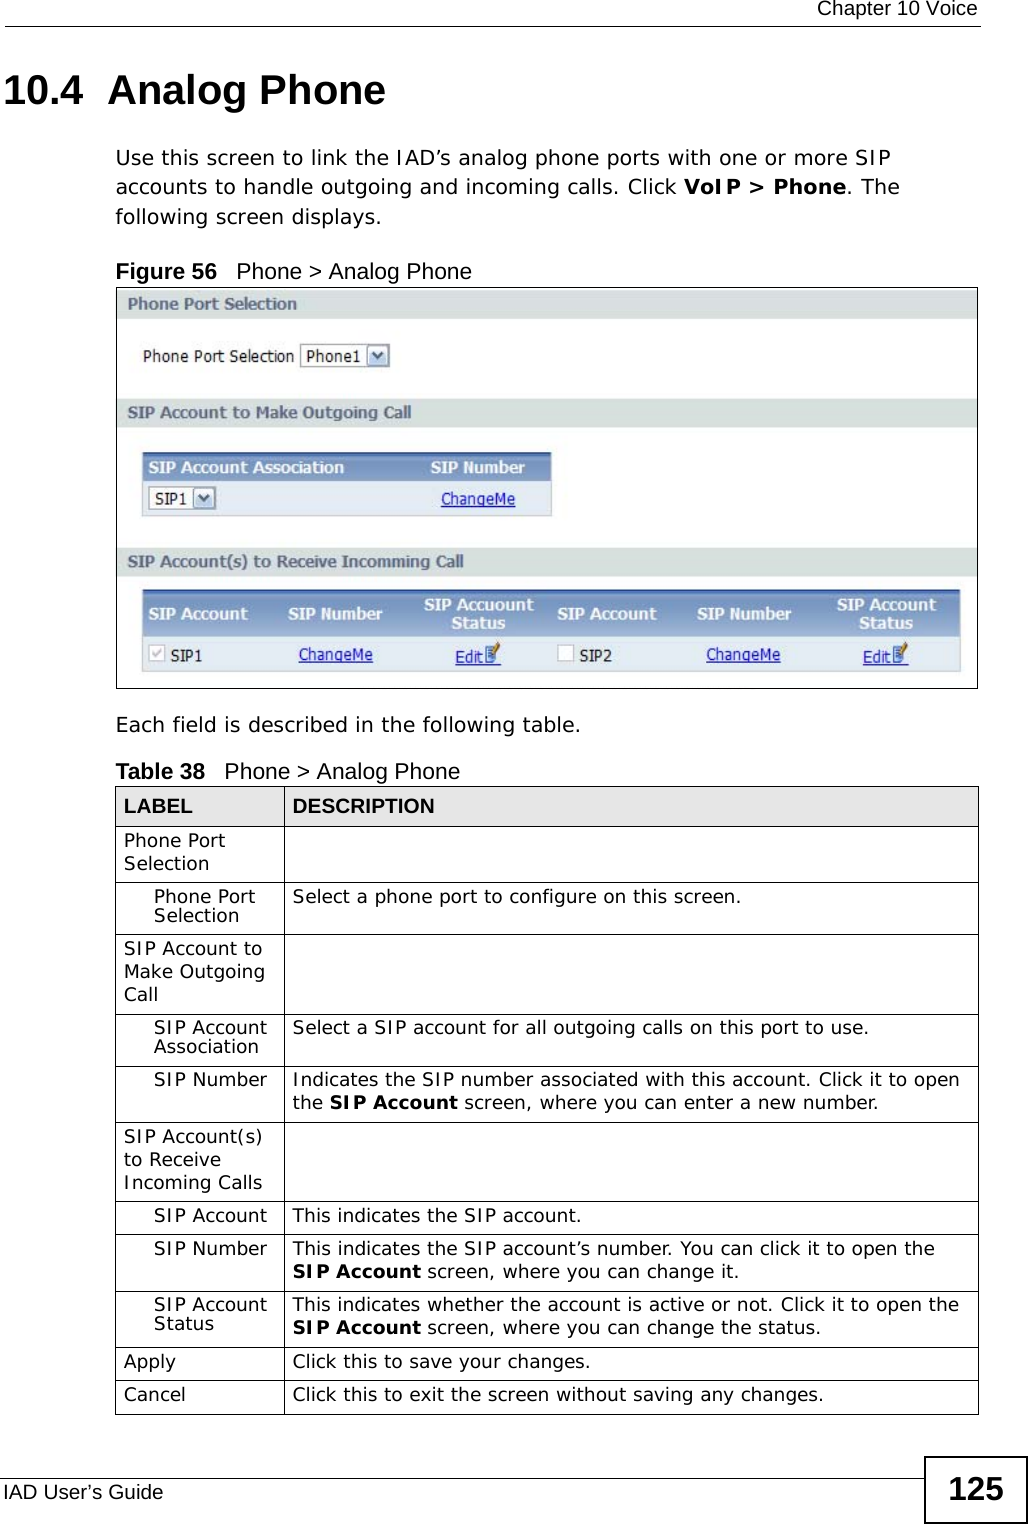  Chapter 10 VoiceIAD User’s Guide 12510.4  Analog Phone Use this screen to link the IAD’s analog phone ports with one or more SIP accounts to handle outgoing and incoming calls. Click VoIP &gt; Phone. The following screen displays.Figure 56   Phone &gt; Analog PhoneEach field is described in the following table.Table 38   Phone &gt; Analog PhoneLABEL DESCRIPTIONPhone Port SelectionPhone Port Selection Select a phone port to configure on this screen.SIP Account to Make Outgoing CallSIP Account Association Select a SIP account for all outgoing calls on this port to use.SIP Number Indicates the SIP number associated with this account. Click it to open the SIP Account screen, where you can enter a new number.SIP Account(s) to Receive Incoming CallsSIP Account This indicates the SIP account.SIP Number This indicates the SIP account’s number. You can click it to open the SIP Account screen, where you can change it.SIP Account Status This indicates whether the account is active or not. Click it to open the SIP Account screen, where you can change the status.Apply Click this to save your changes.Cancel Click this to exit the screen without saving any changes.